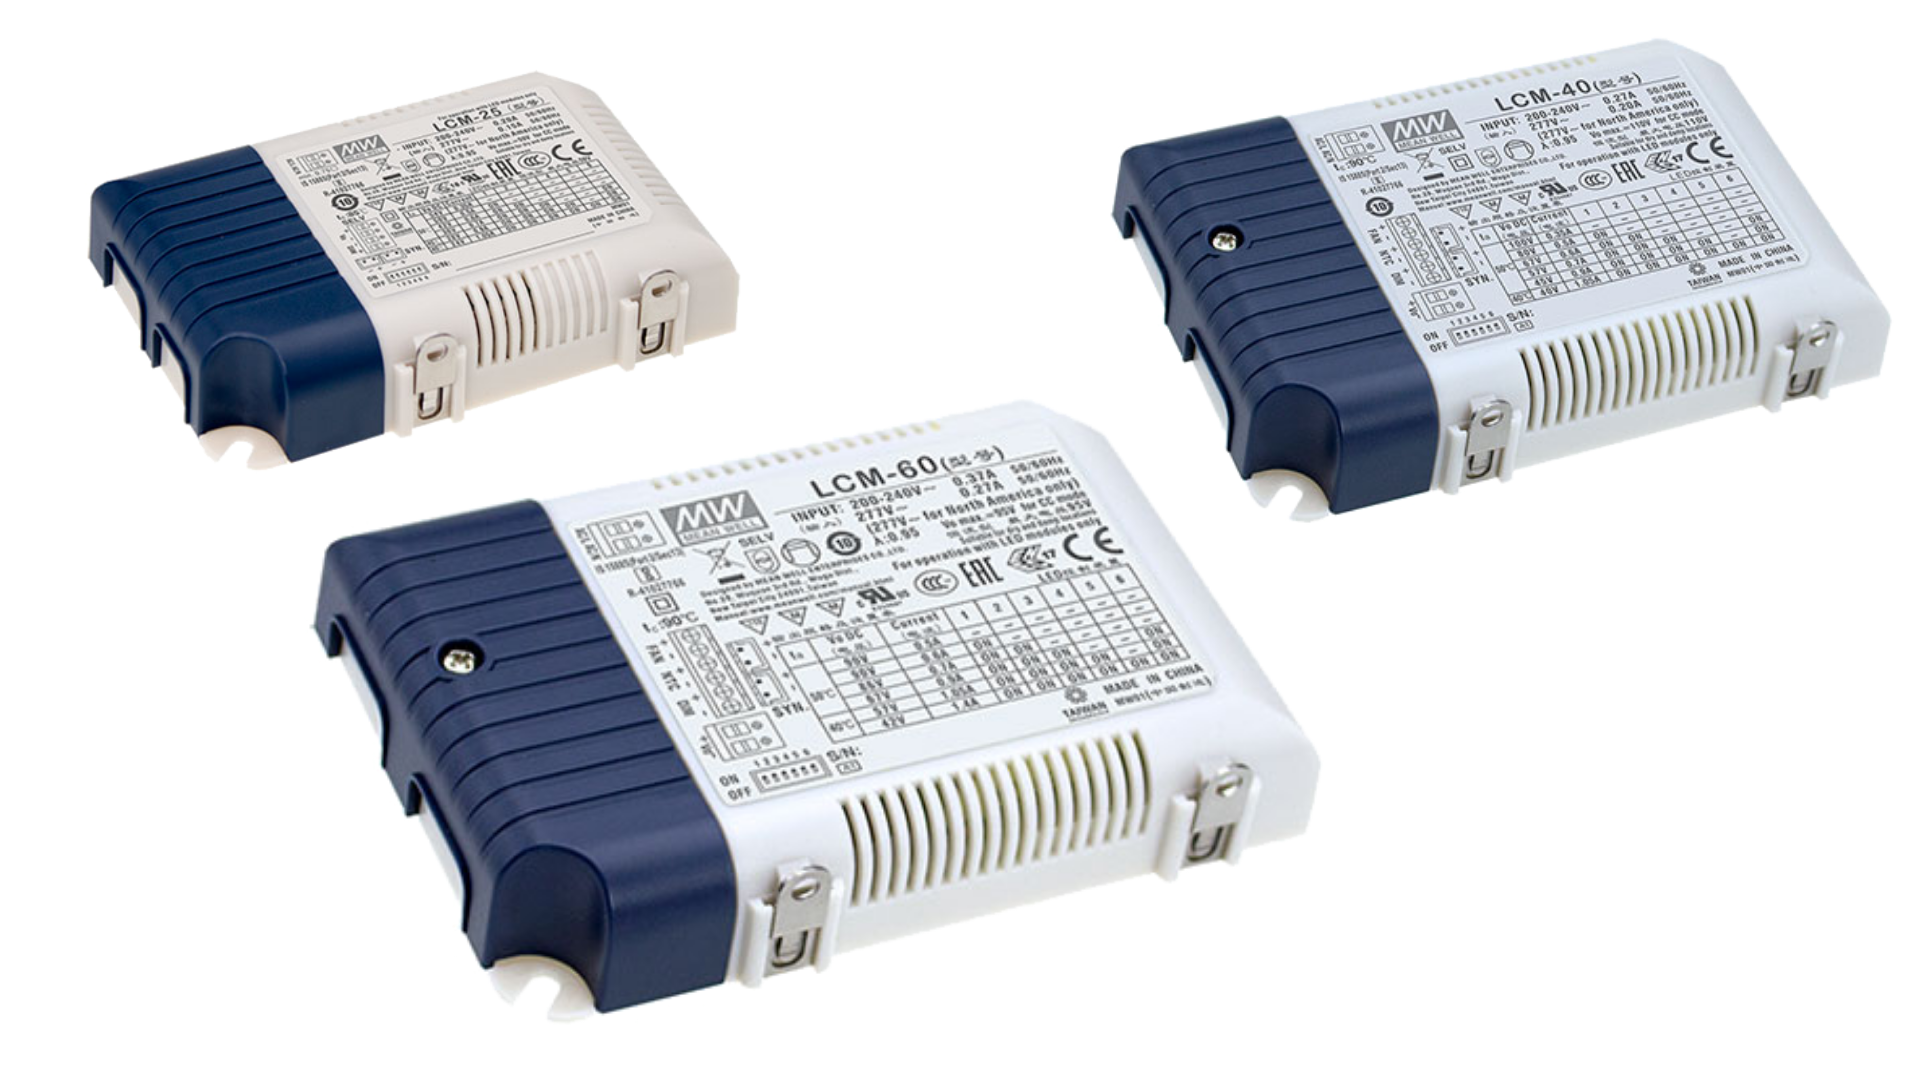 MEAN WELL Series LCM LED Drivers